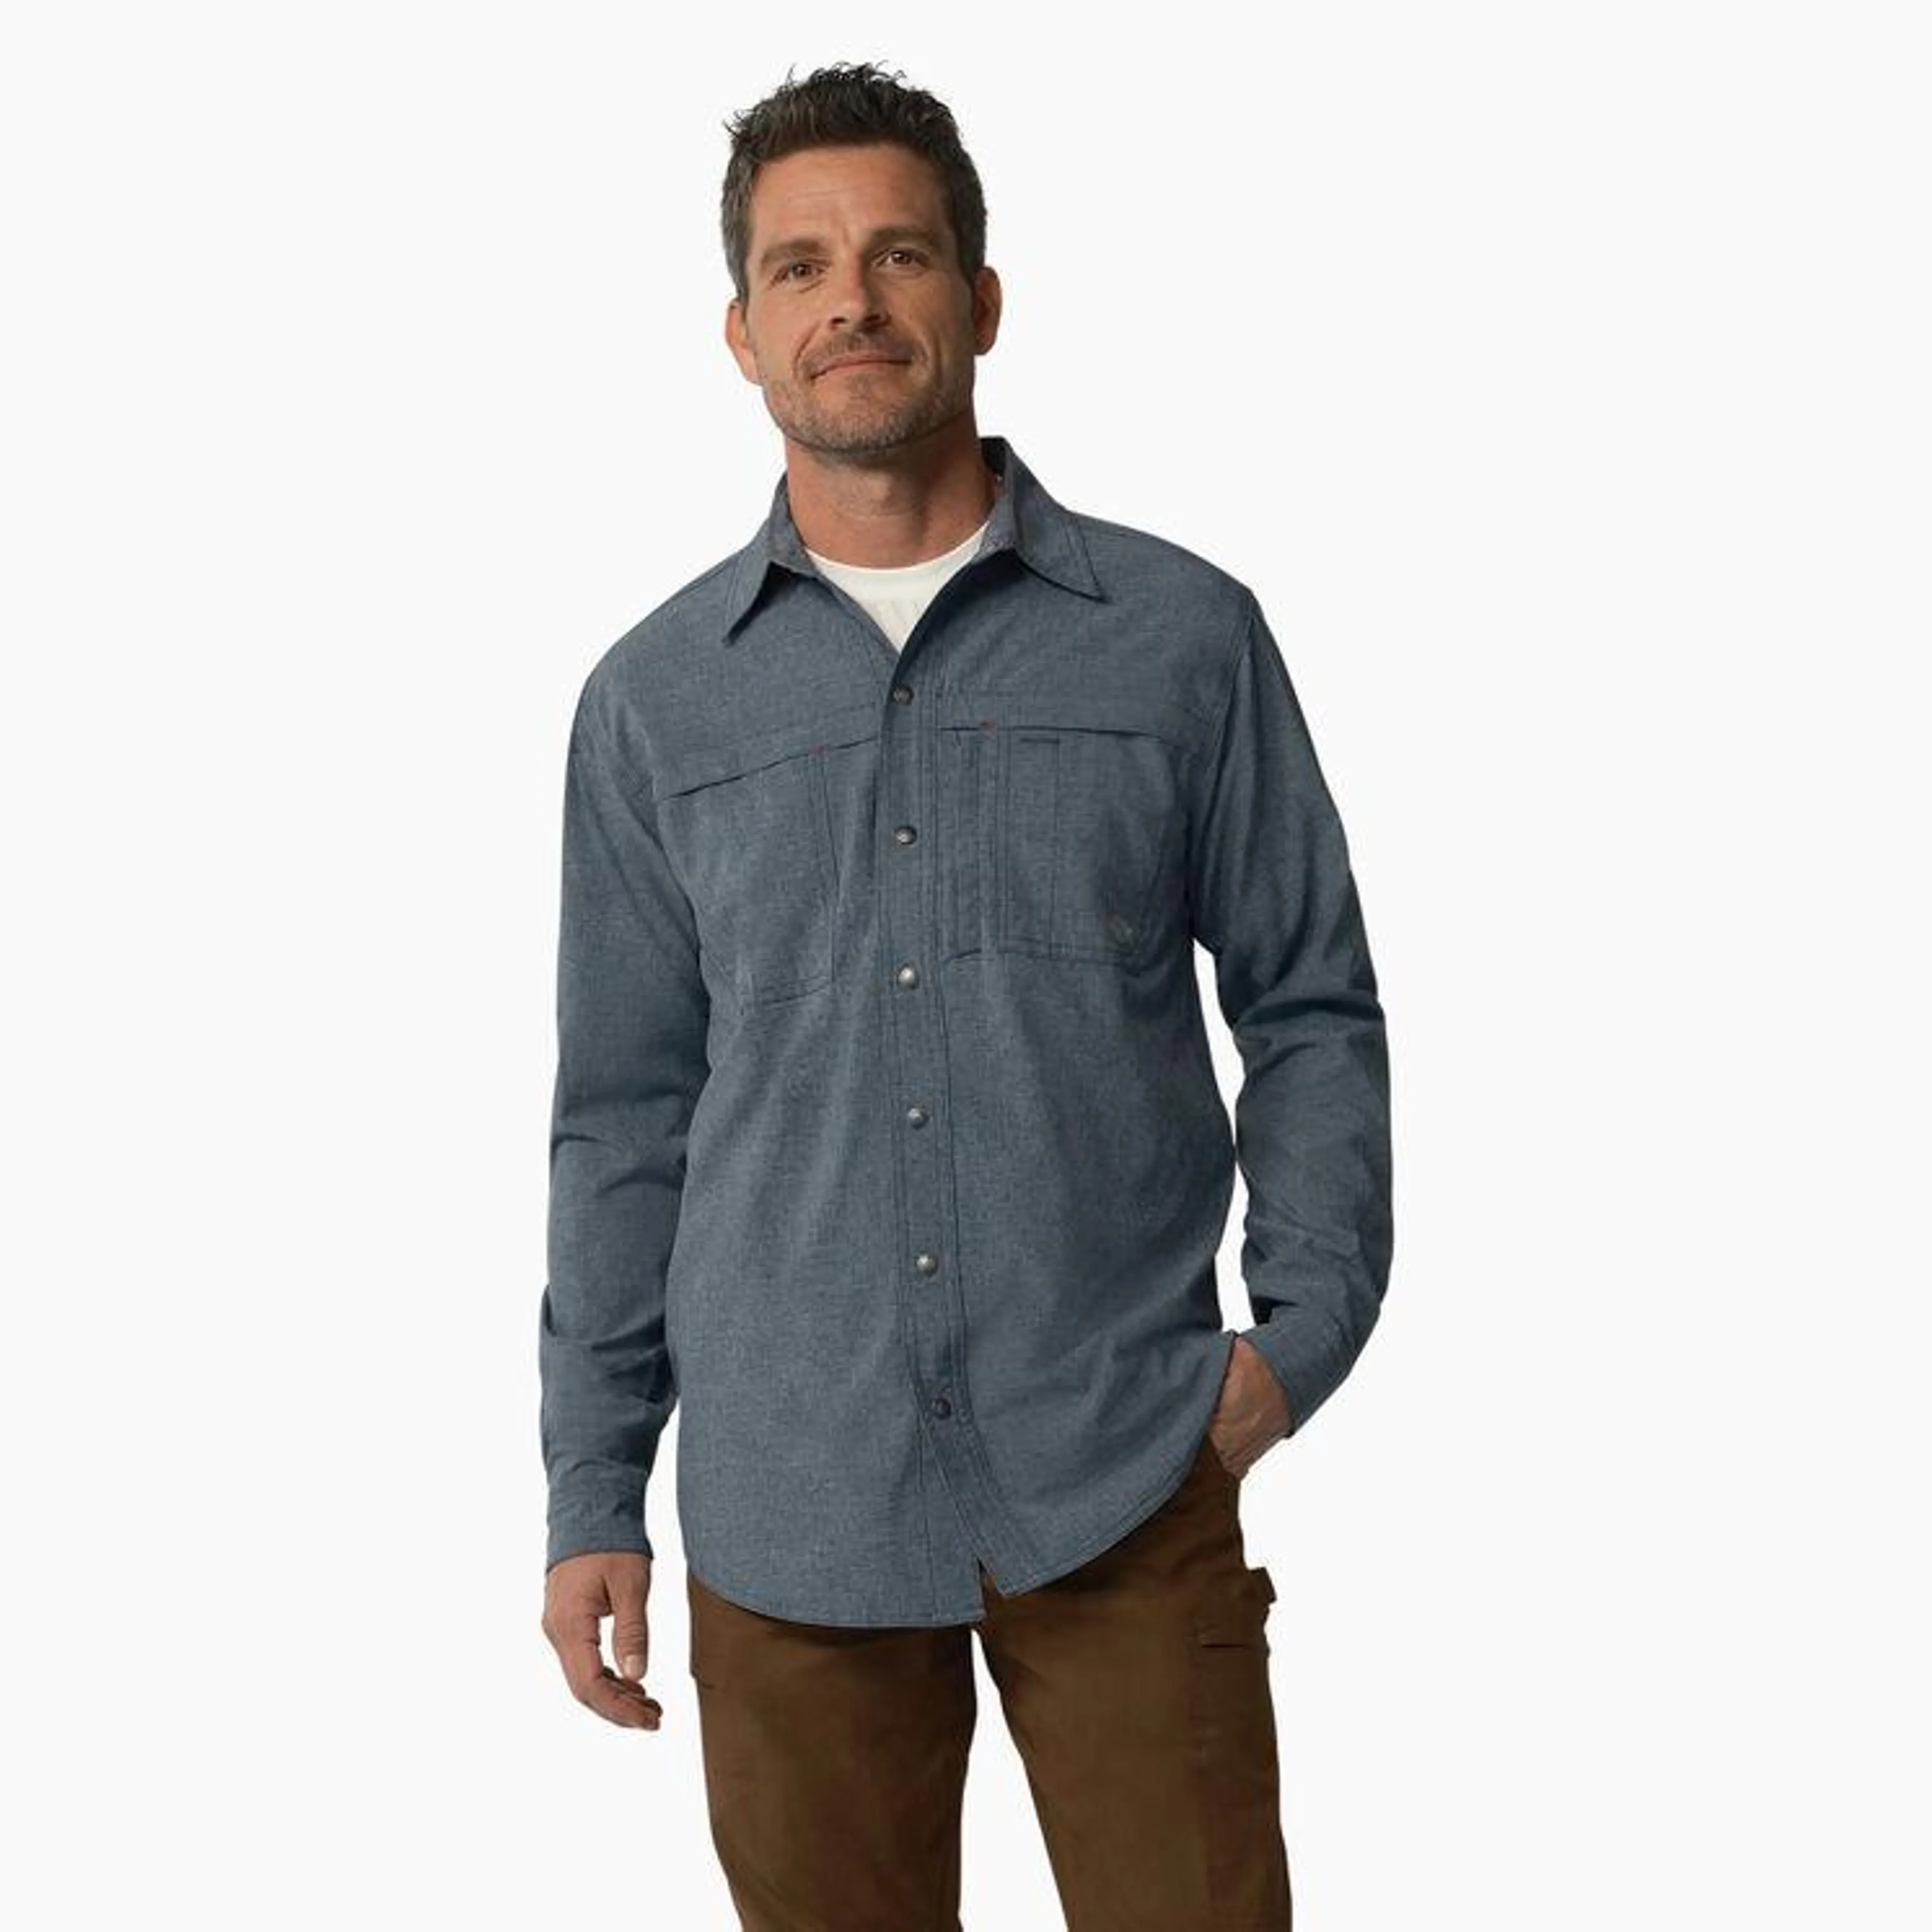 ProTect Cooling Long Sleeve Work Shirt, Airforce Blue